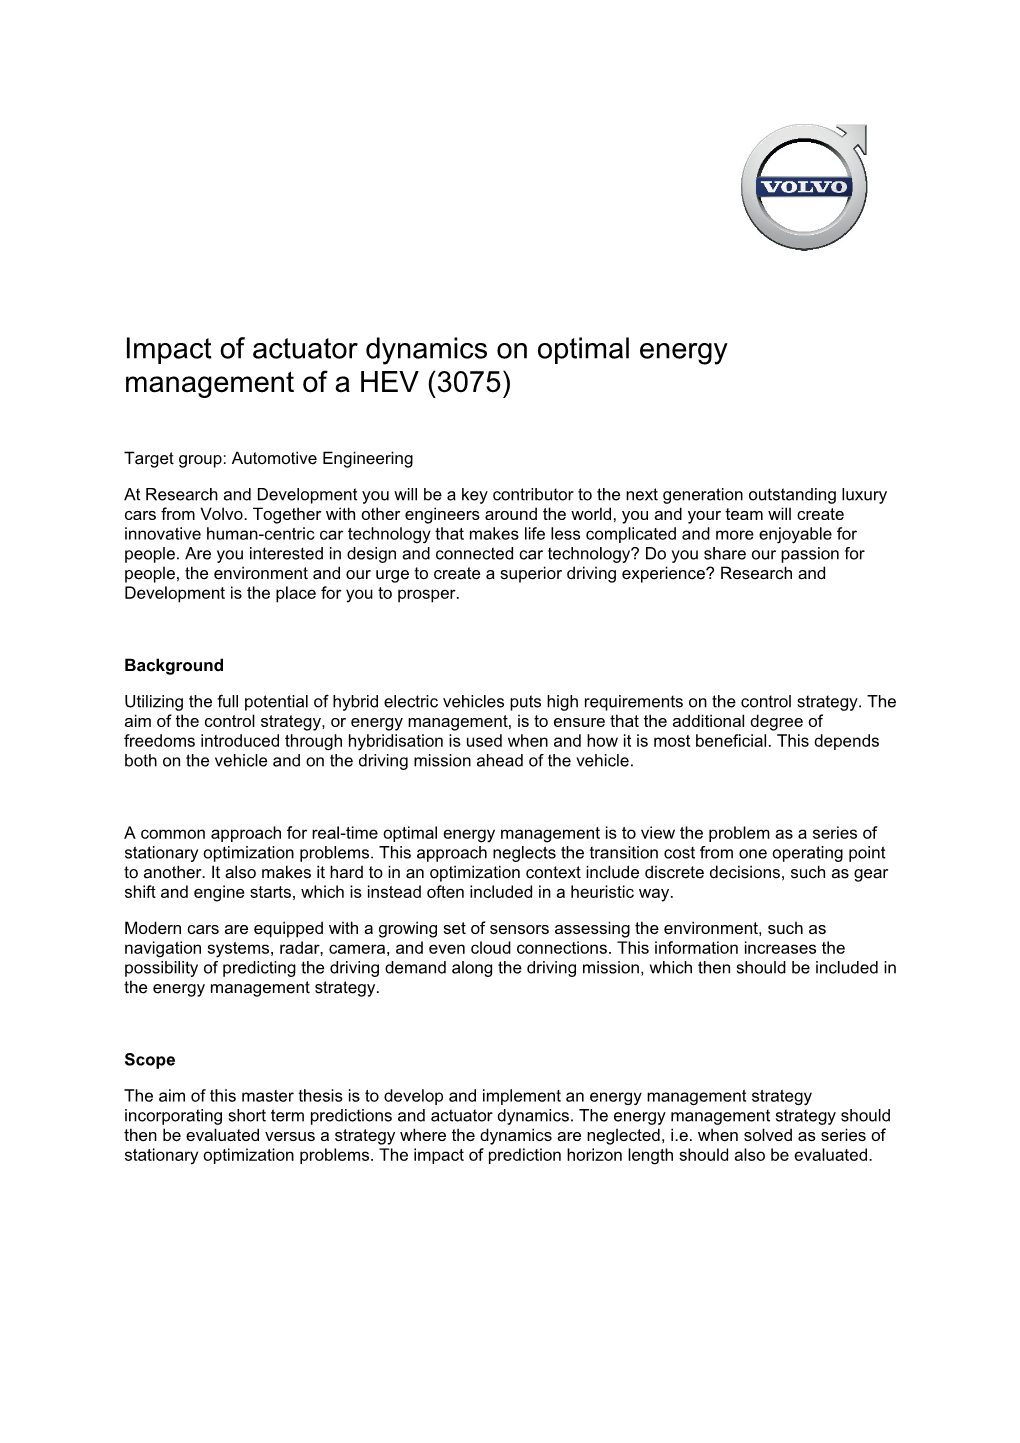 Impact of Actuator Dynamics on Optimal Energy Management of a HEV (3075)